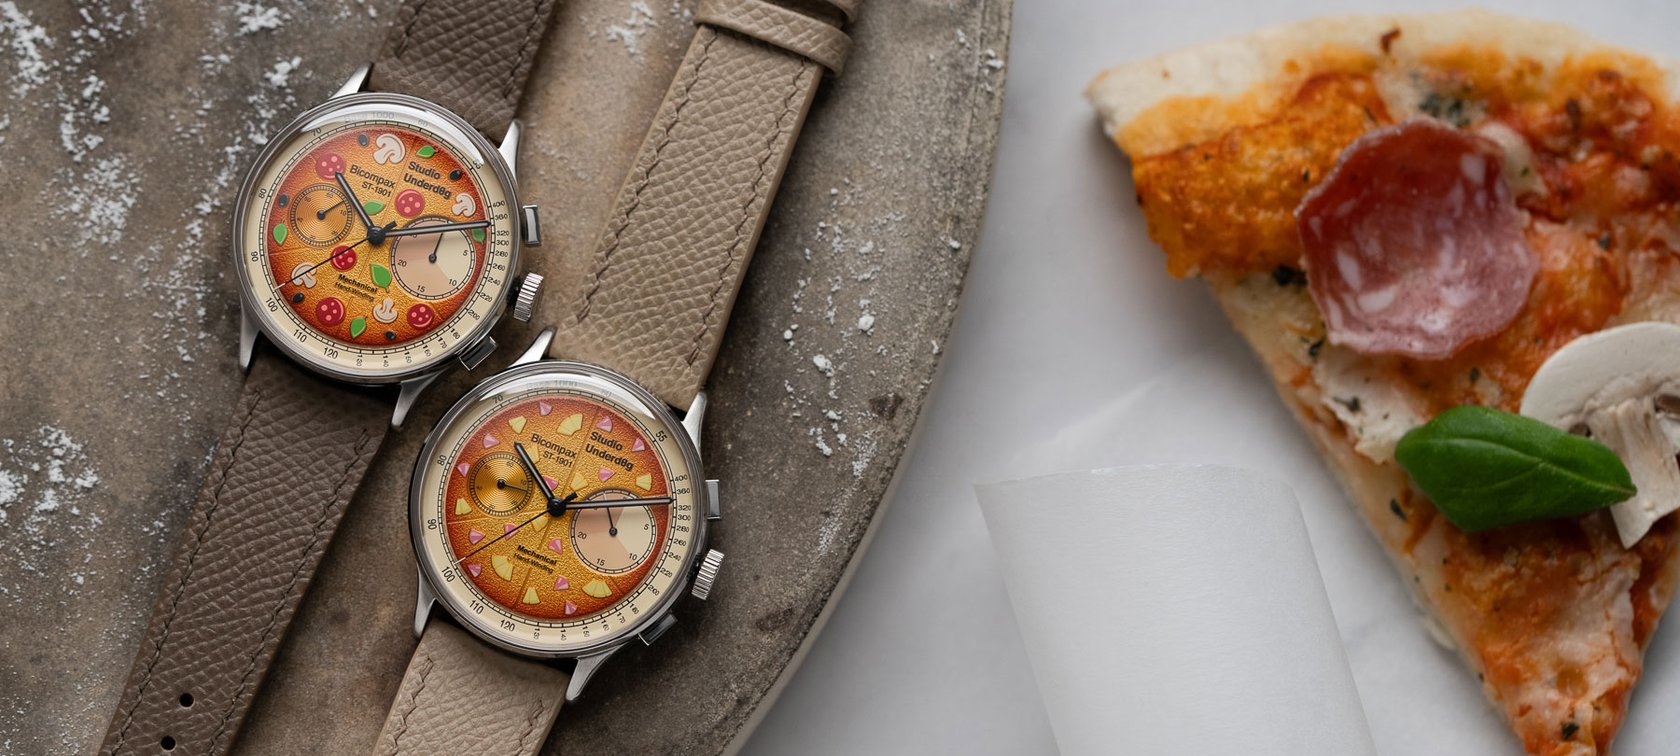 authentic watches - Studio Underd0g Watches - Page 7 Studio-Underd0g-pizza-cover